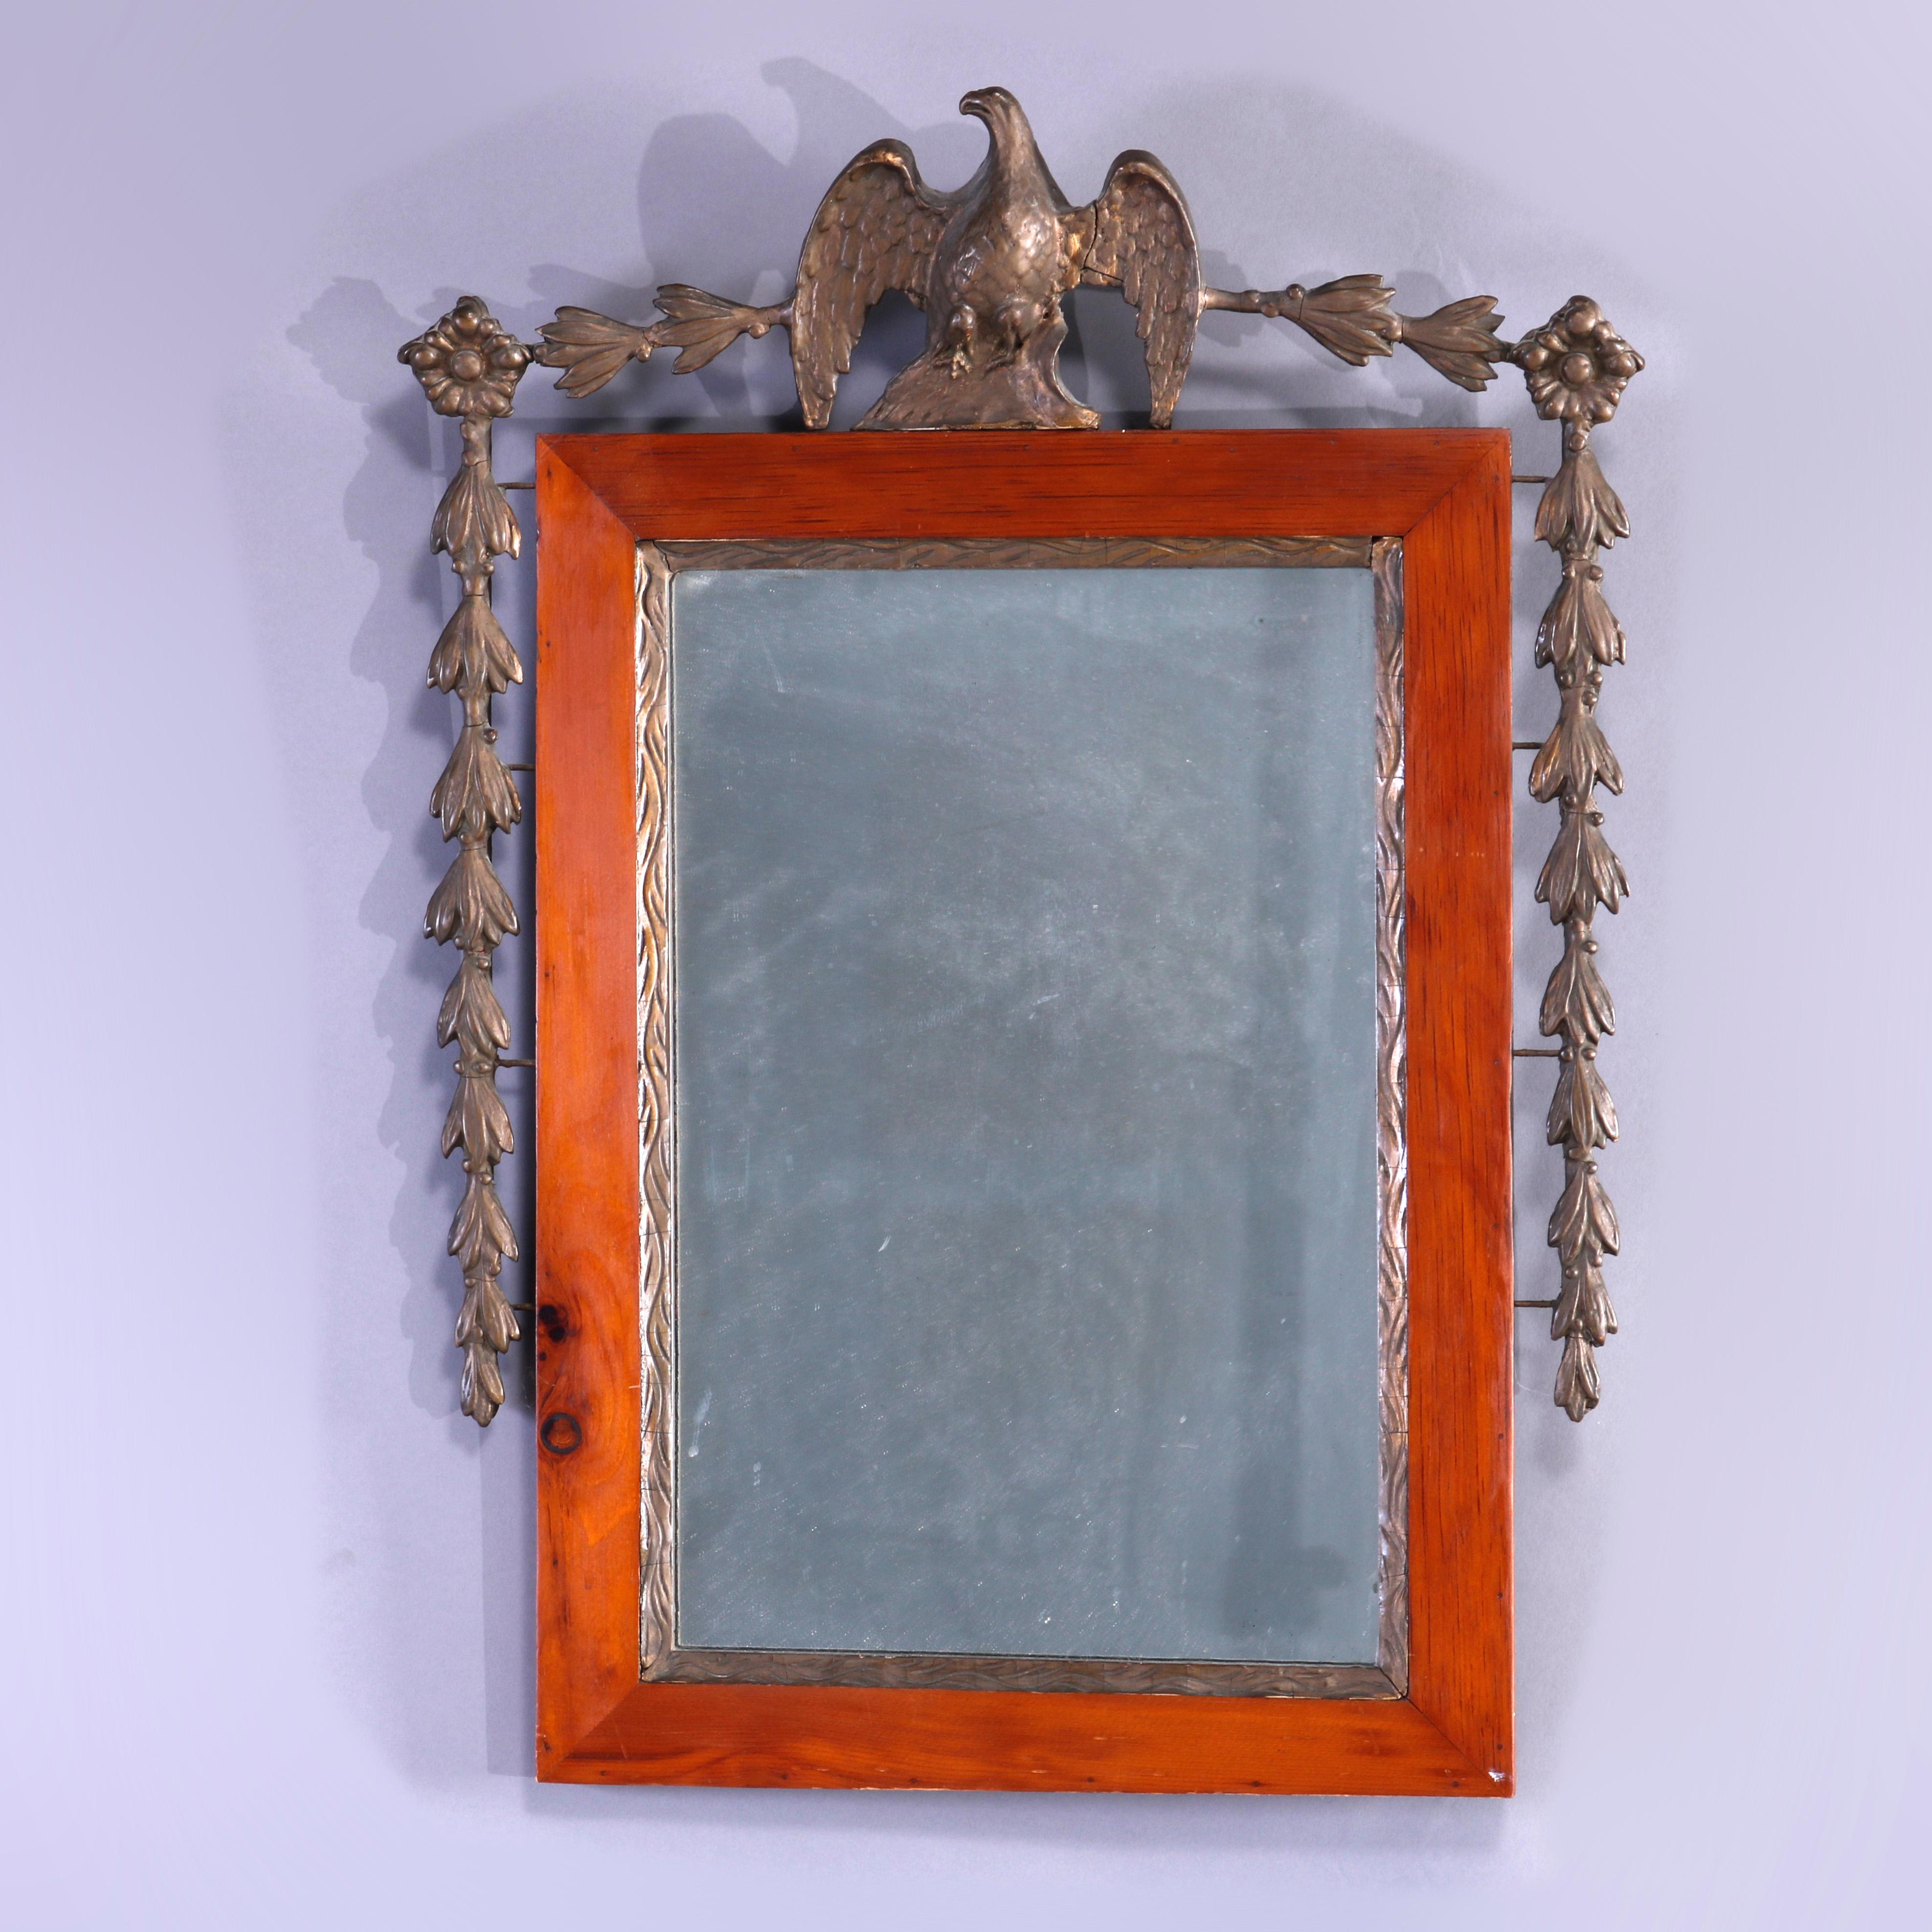 An antique Federal wall mirror offers frame with figural giltwood eagle at crest and having flanking inverted bellflower garland, c1840

Measures - 27''H x 19.5''W x 2.5''D.

Catalogue Note: Ask about DISCOUNTED DELIVERY RATES available to most